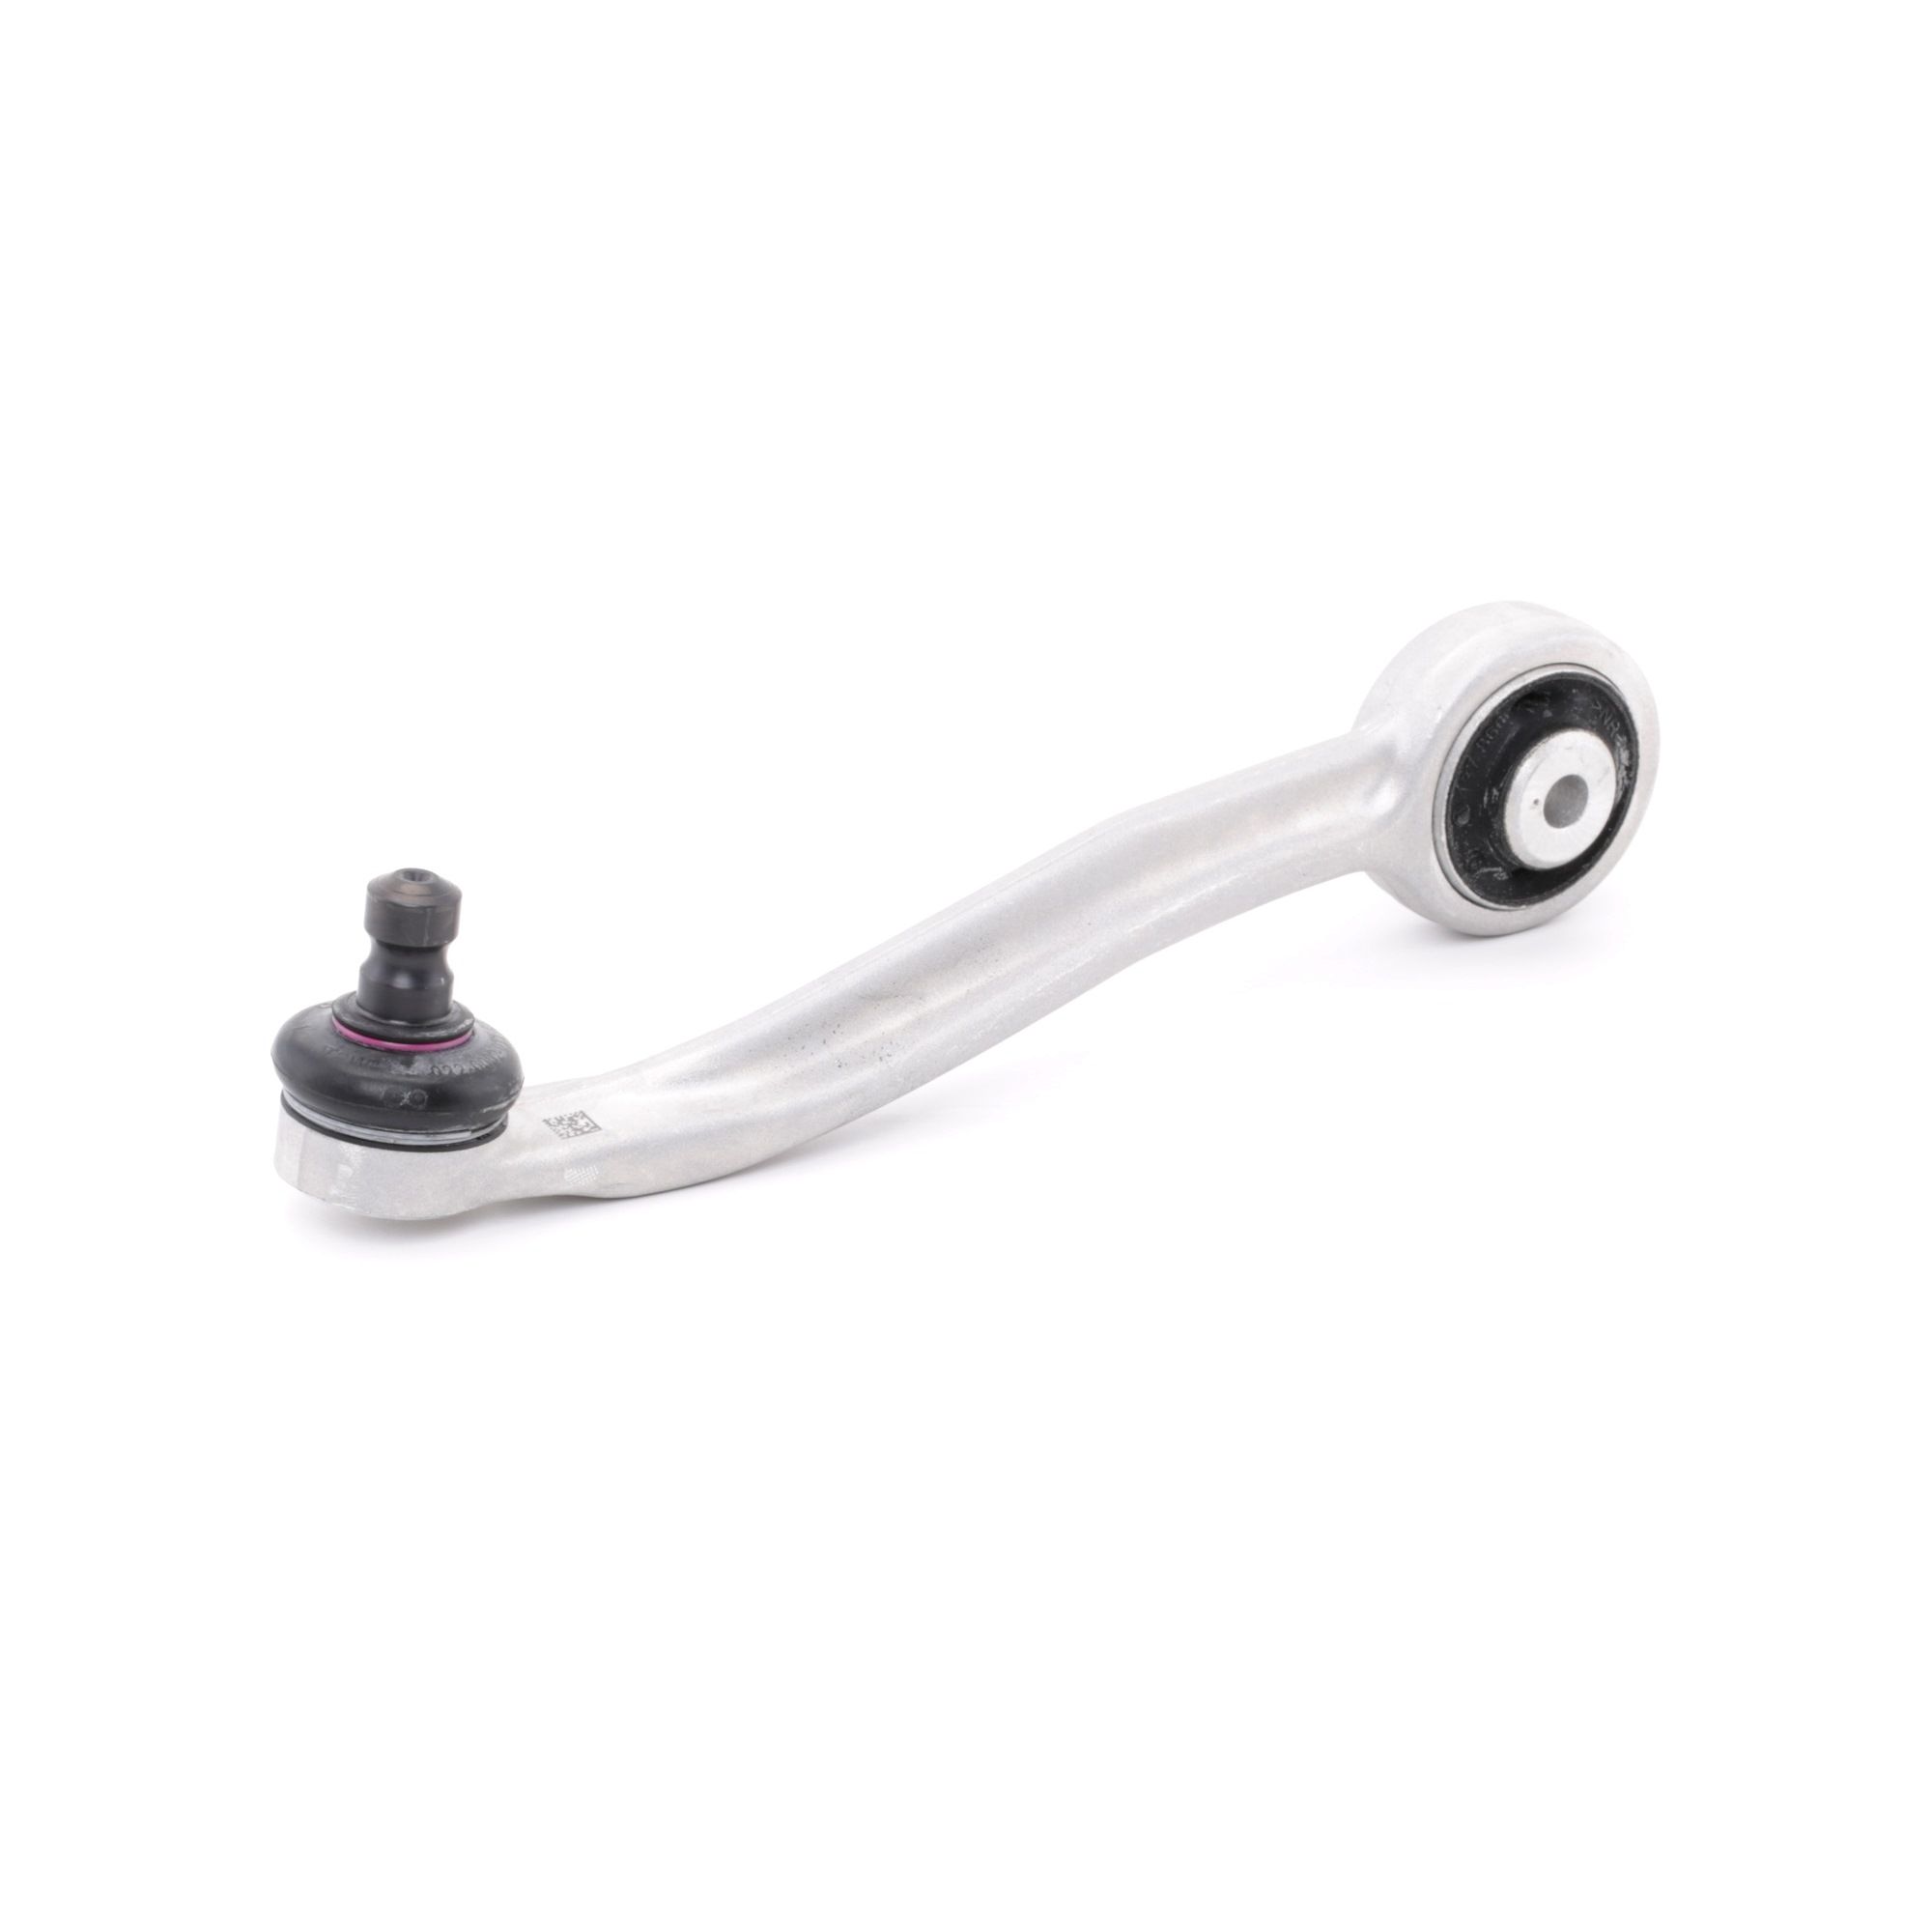 TRW with accessories, Control Arm, Cone Size: 16 mm Cone Size: 16mm Control arm JTC1182 buy